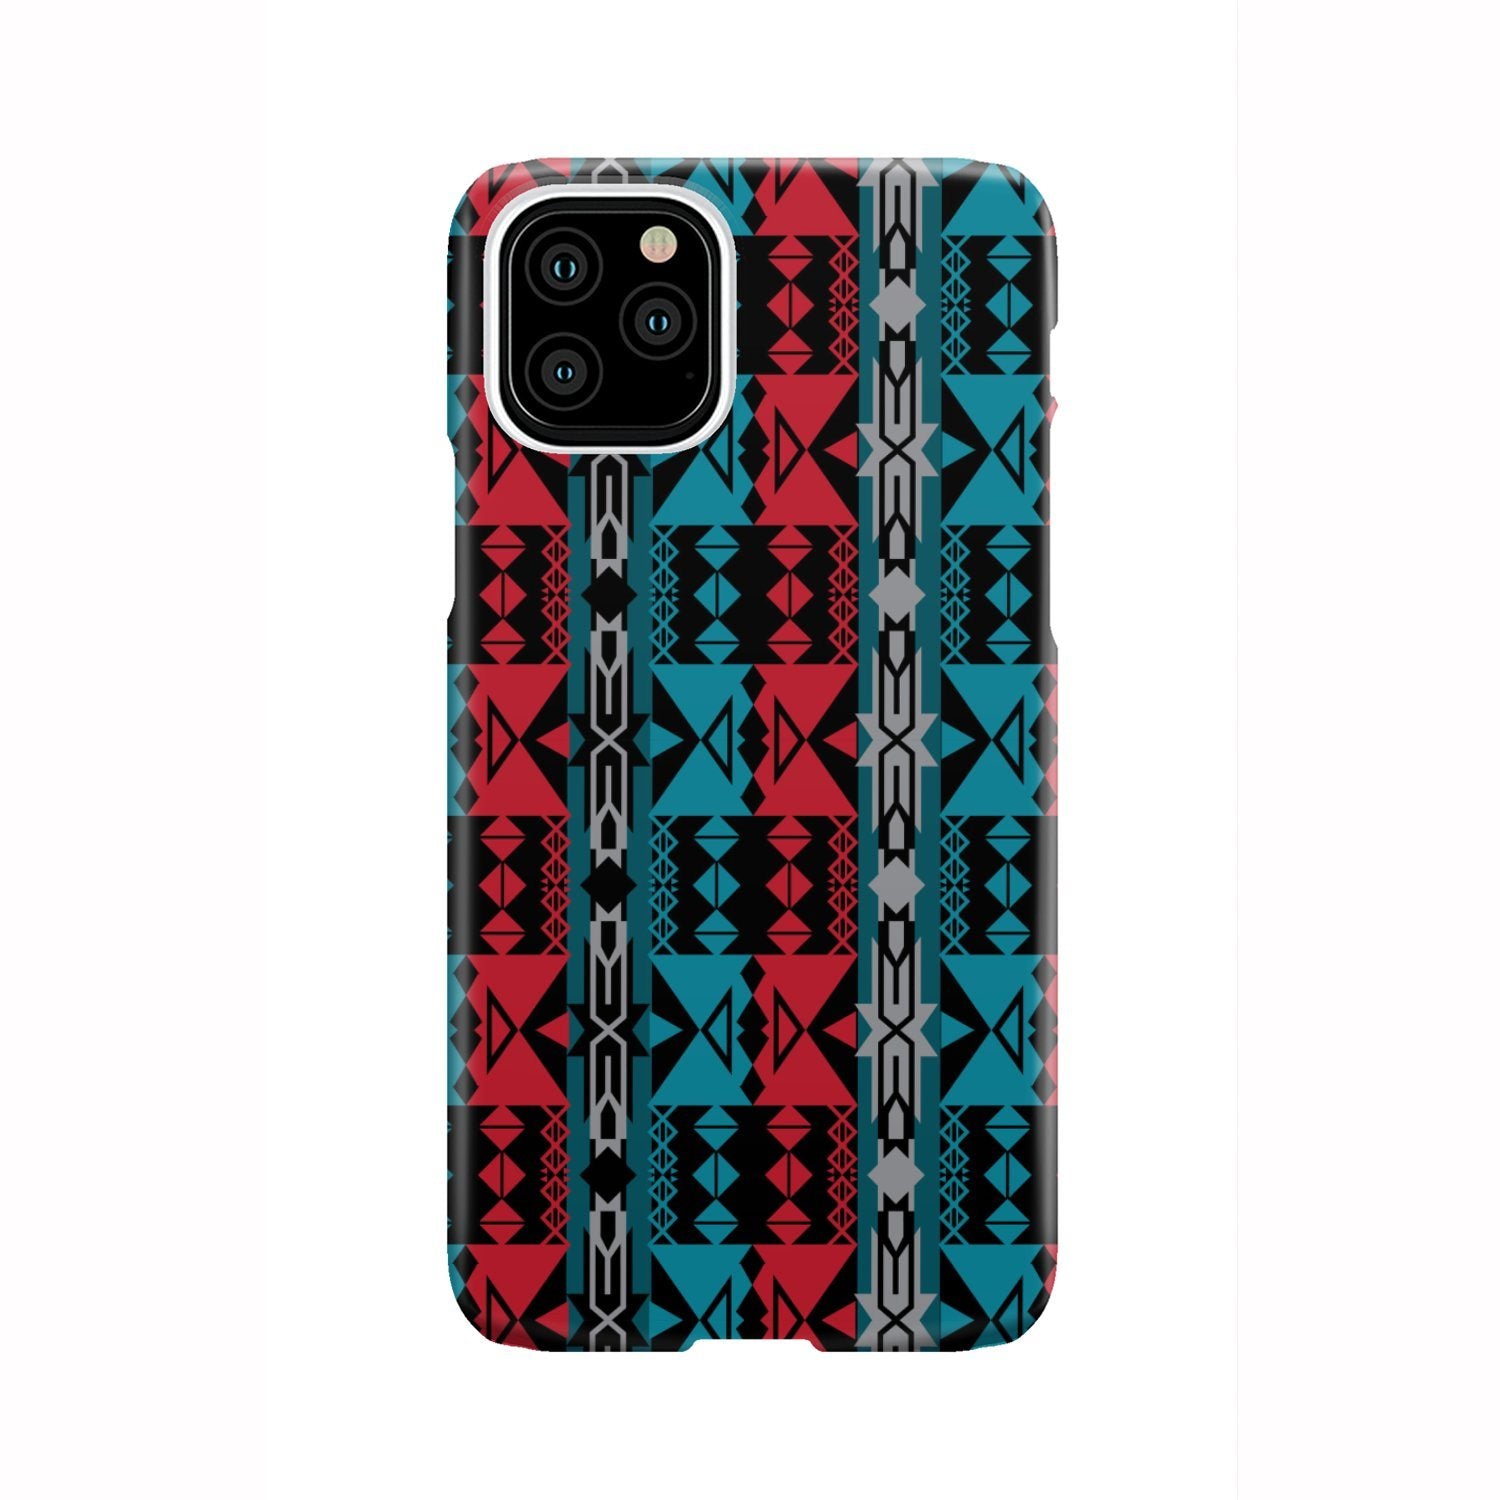 Inside the Lodge Phone Case Phone Case wc-fulfillment iPhone 11 Pro 